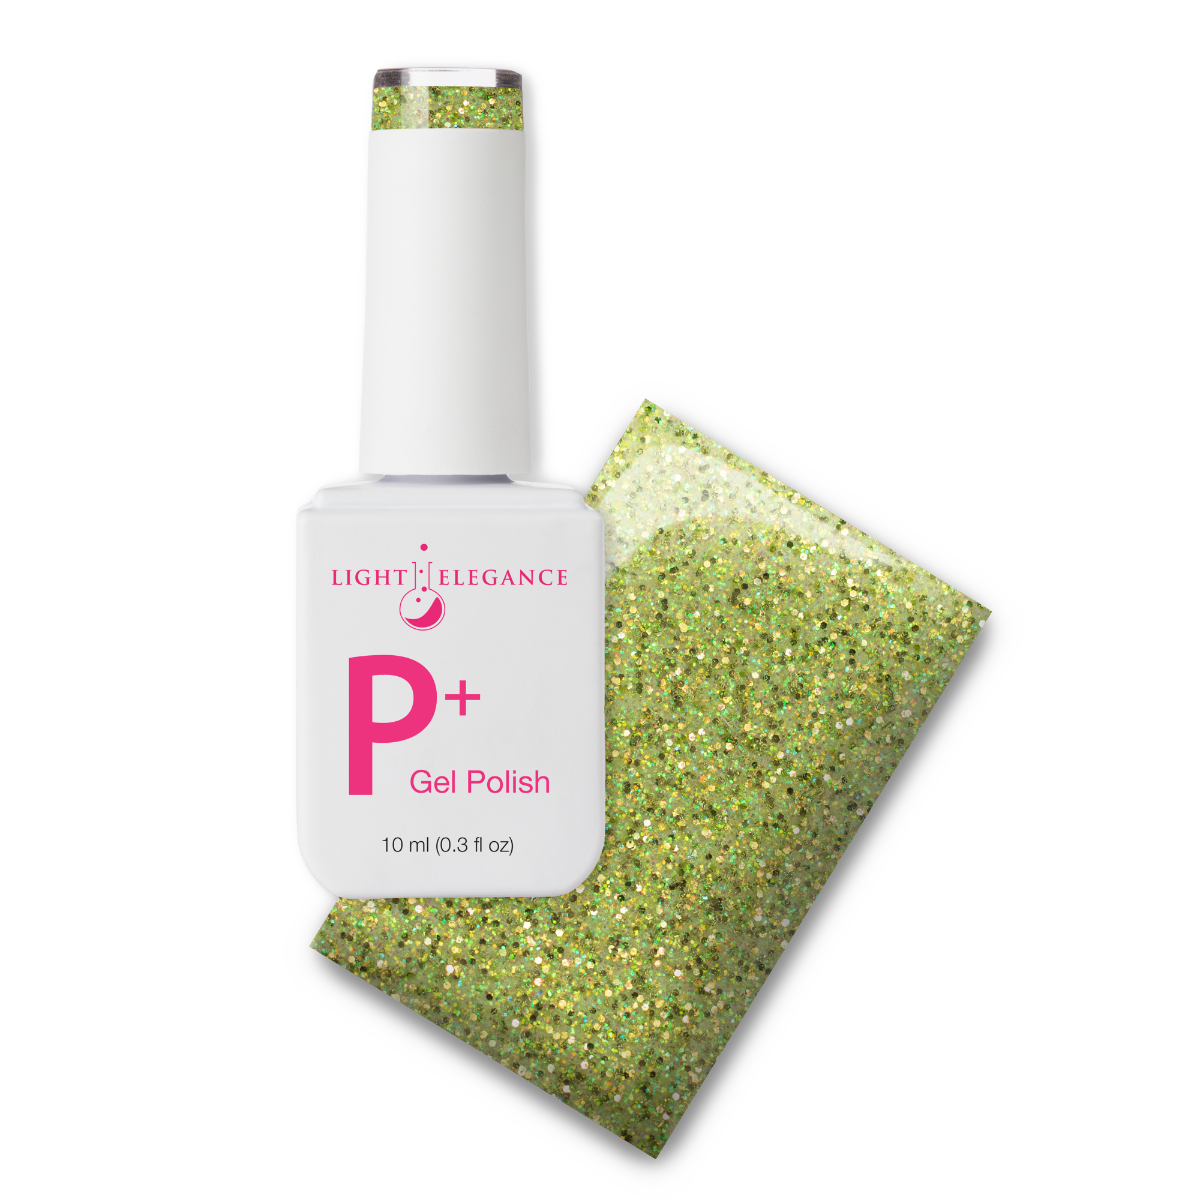 Light Elegance P+ Soak Off Glitter Gel - Peace and Love :: New Packaging - Creata Beauty - Professional Beauty Products